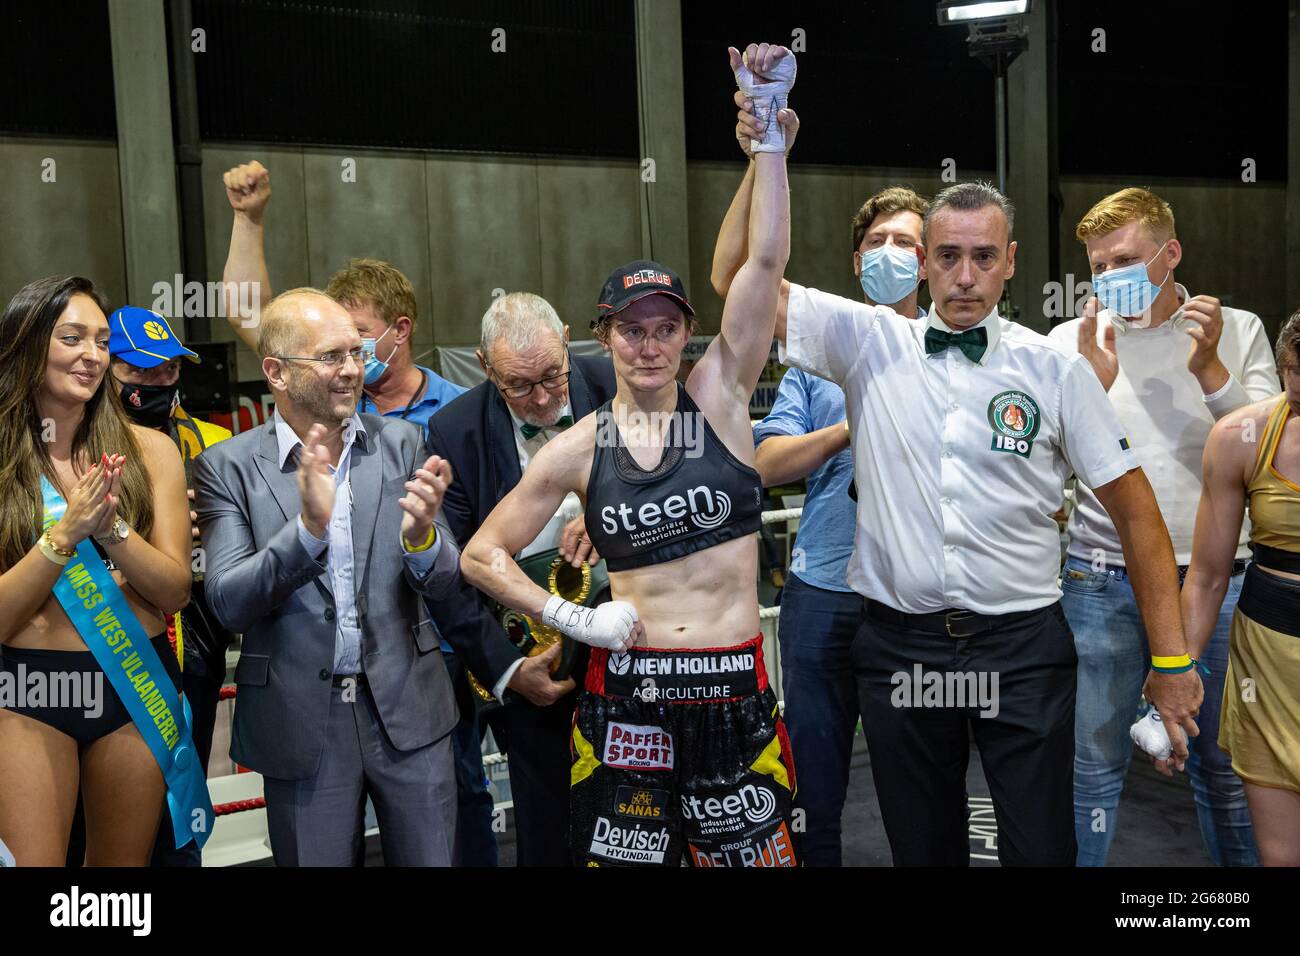 Belgian Delfine Persoon celebrates after winning the fight between Belgian Delfine Persoon and Russian Elena Gradinar, for the International Boxing Or Stock Photo